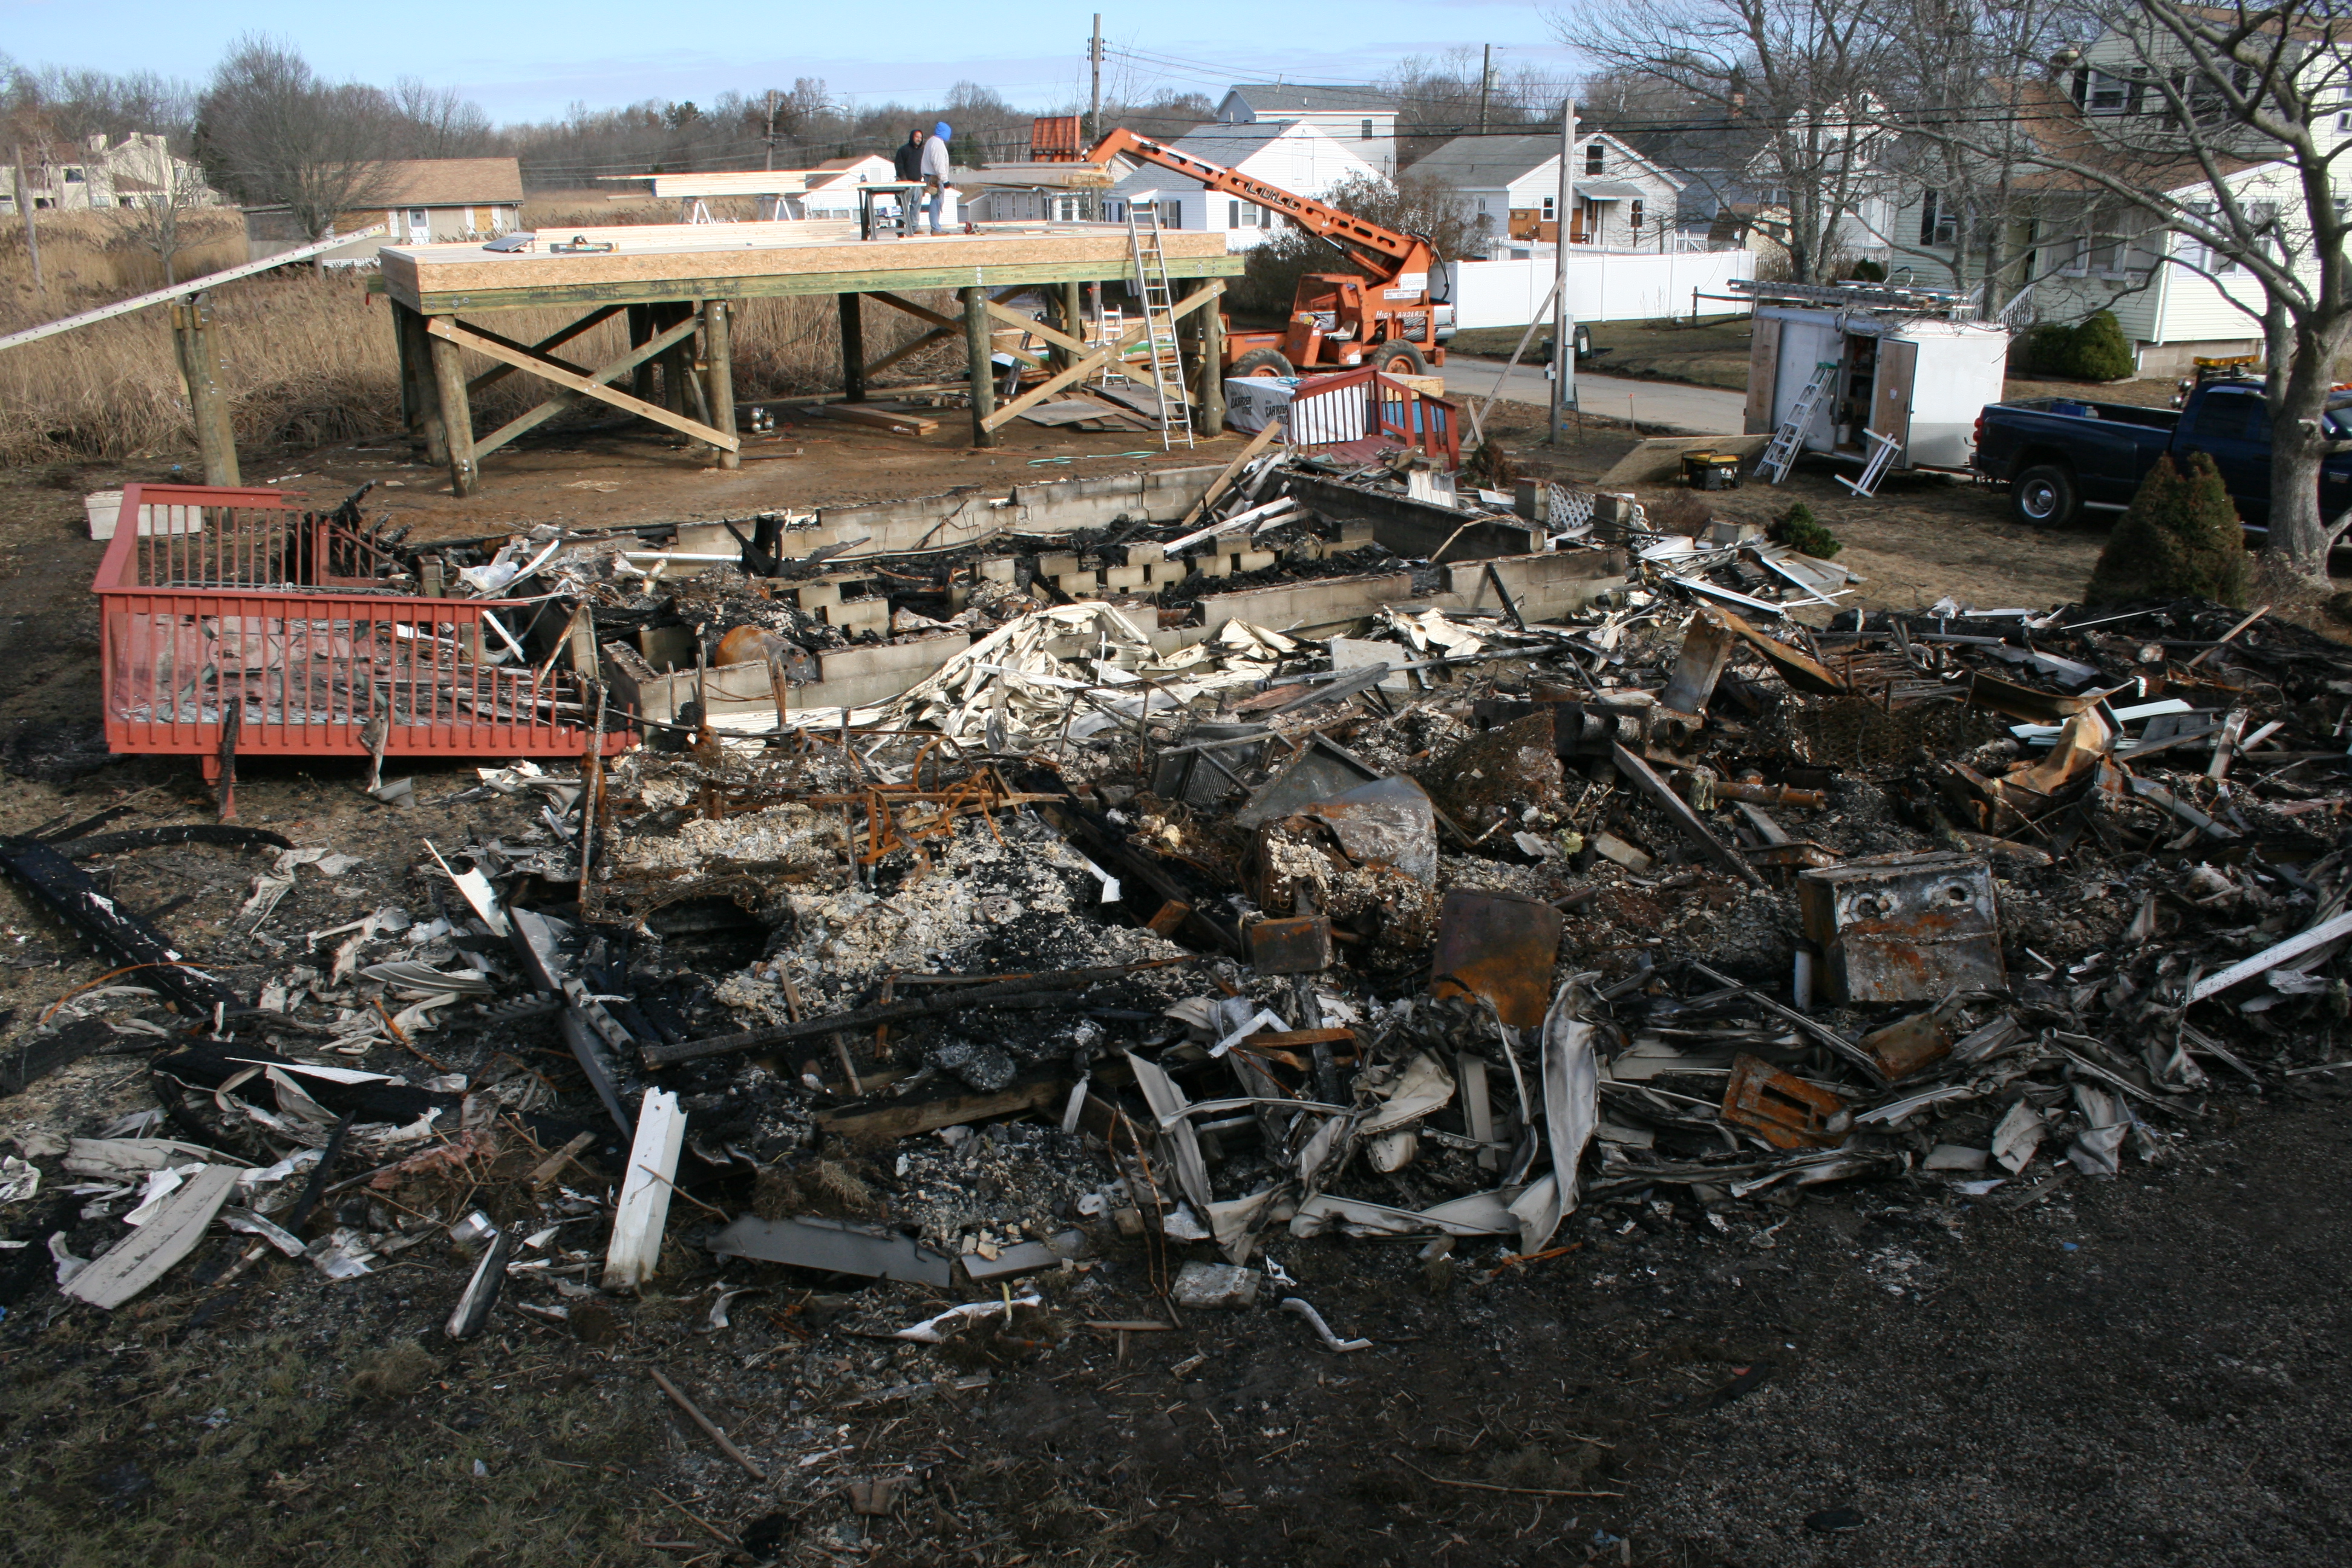 Remains of two Chalker Beach cottages burned to the ground.